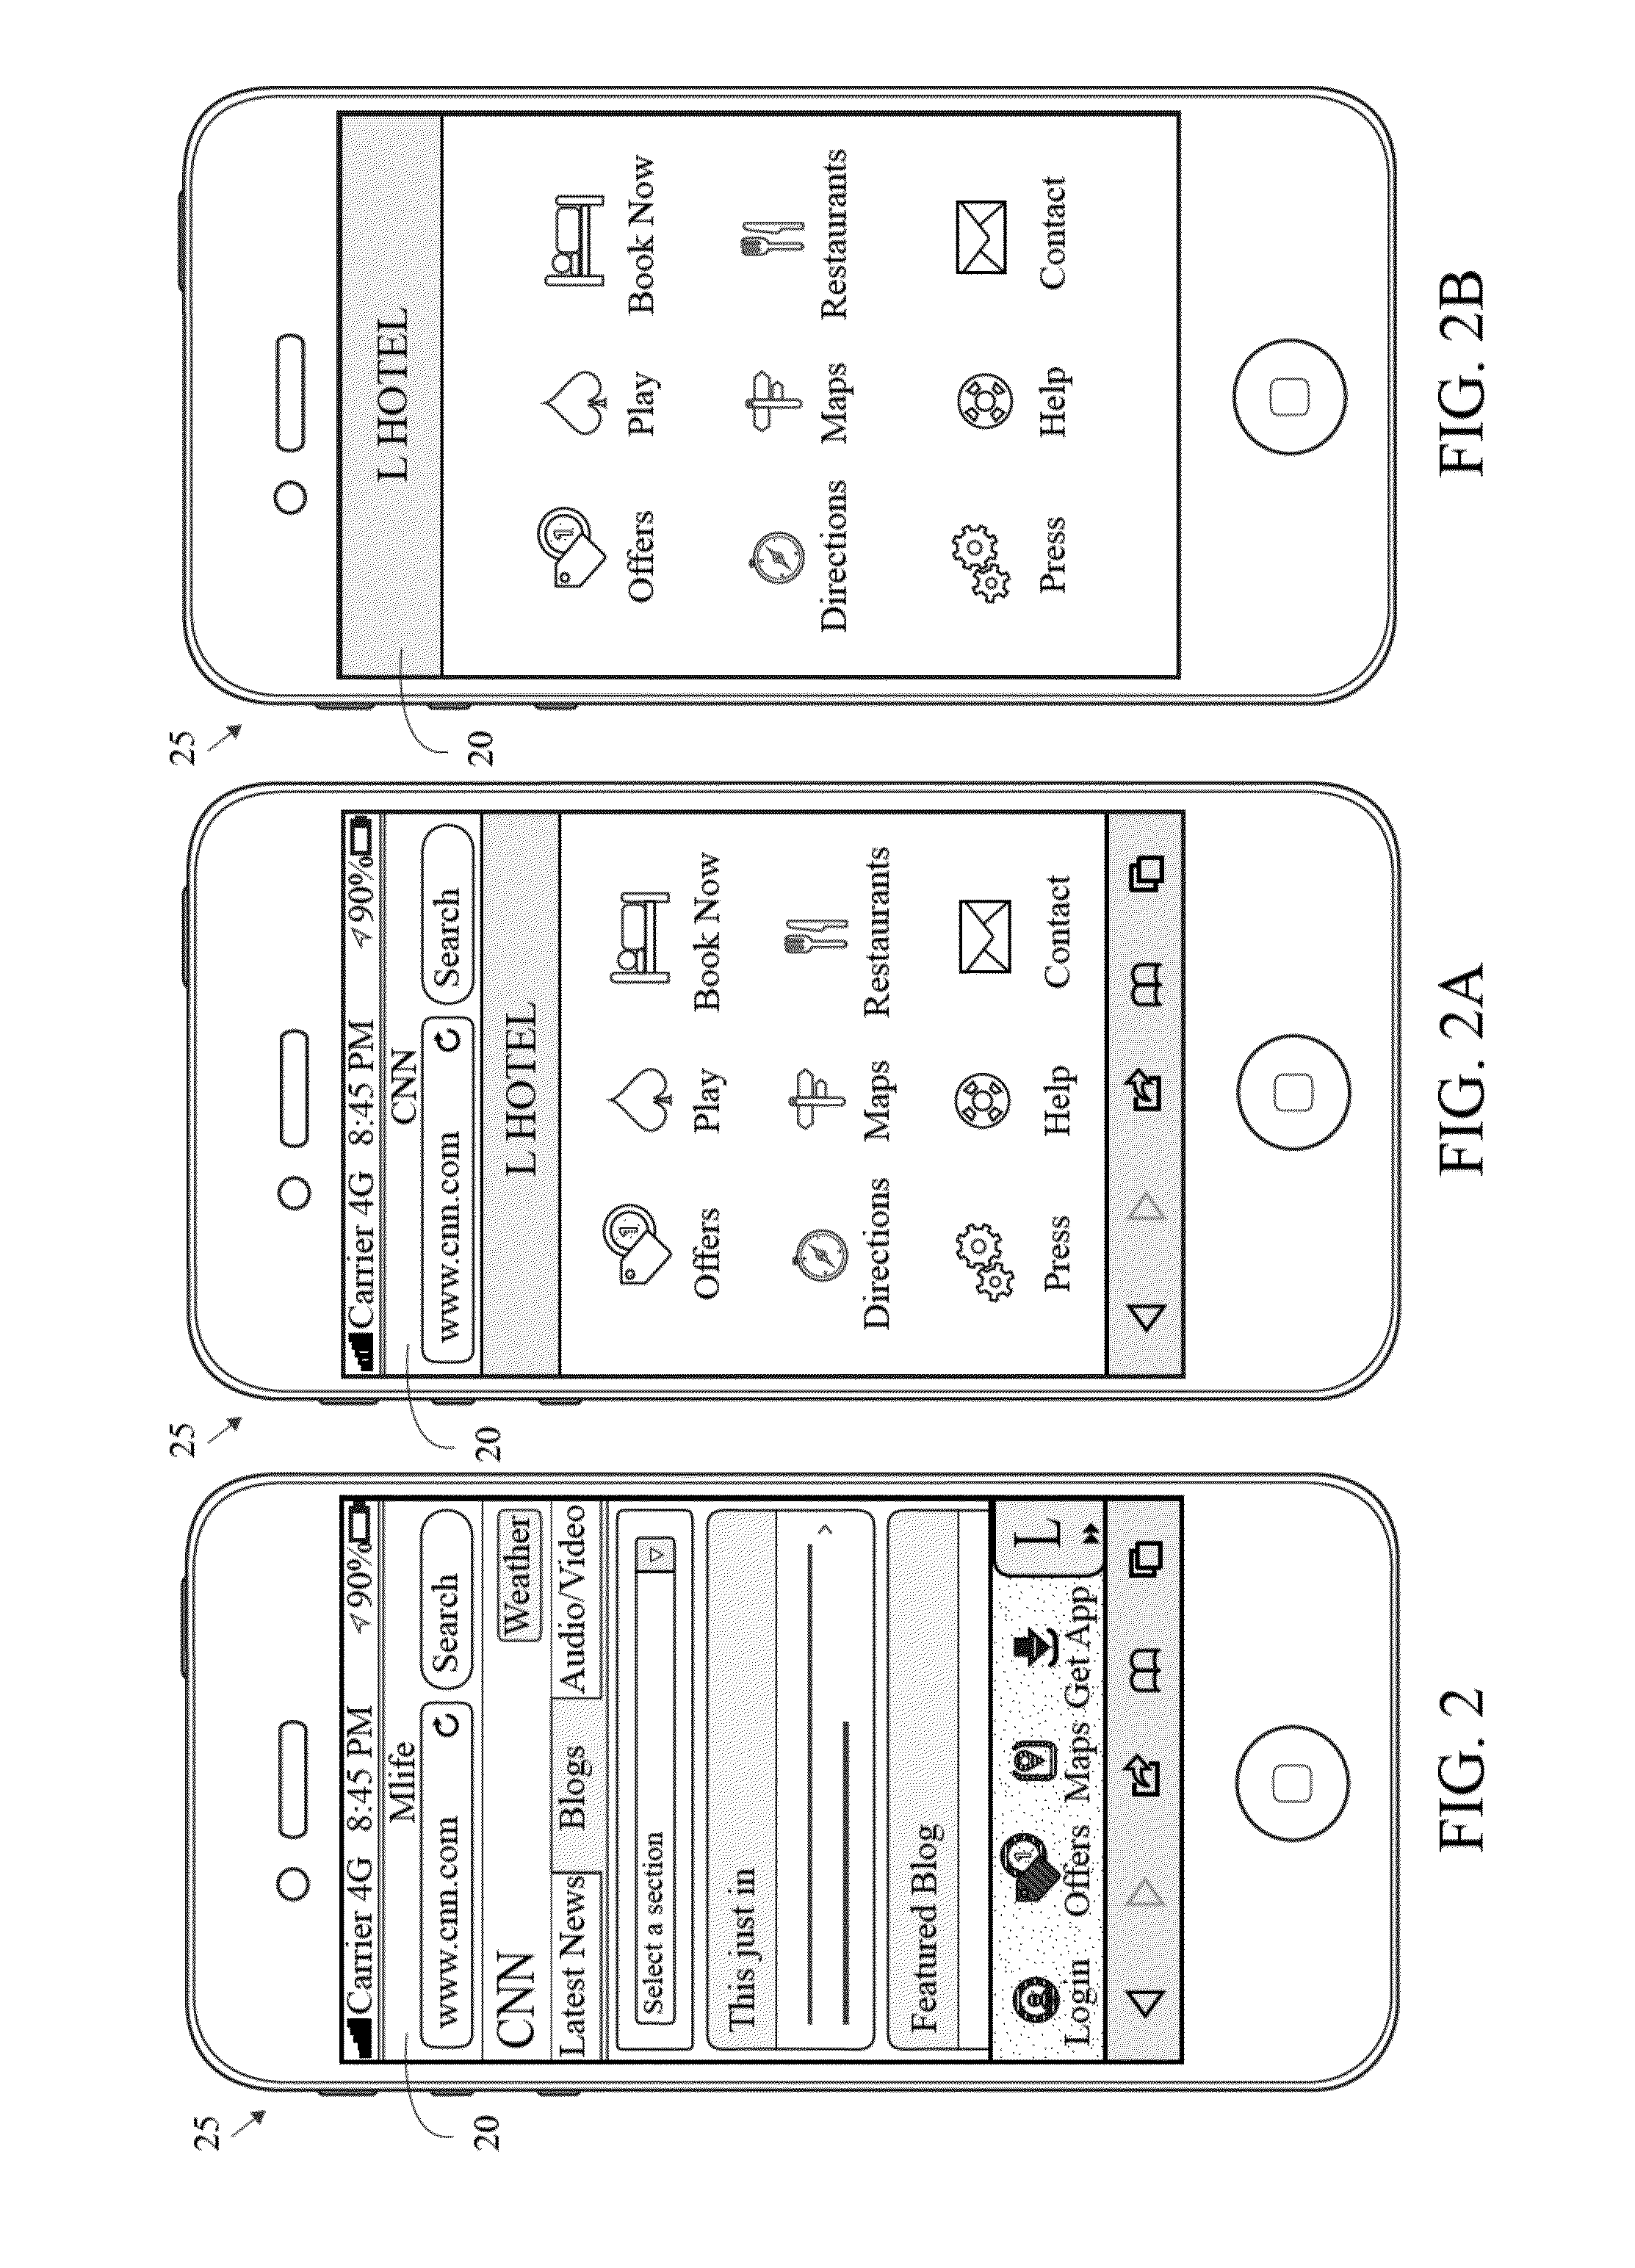 Method and system for providing real-time end-user WiFi quality data